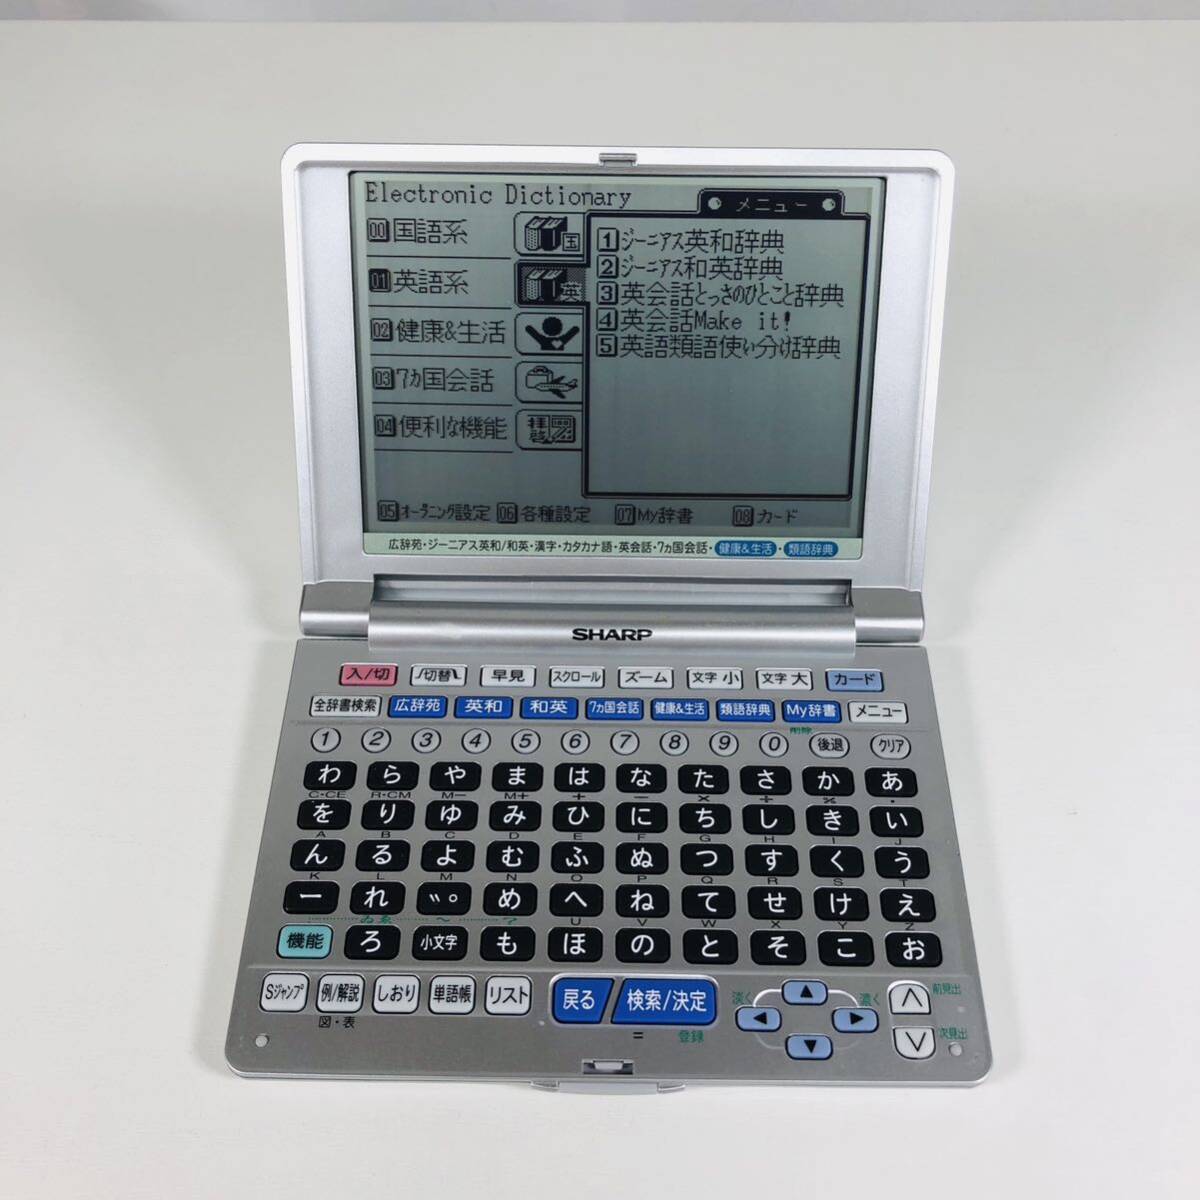  used operation goods Junk sharp computerized dictionary PW-A8050 SHARP